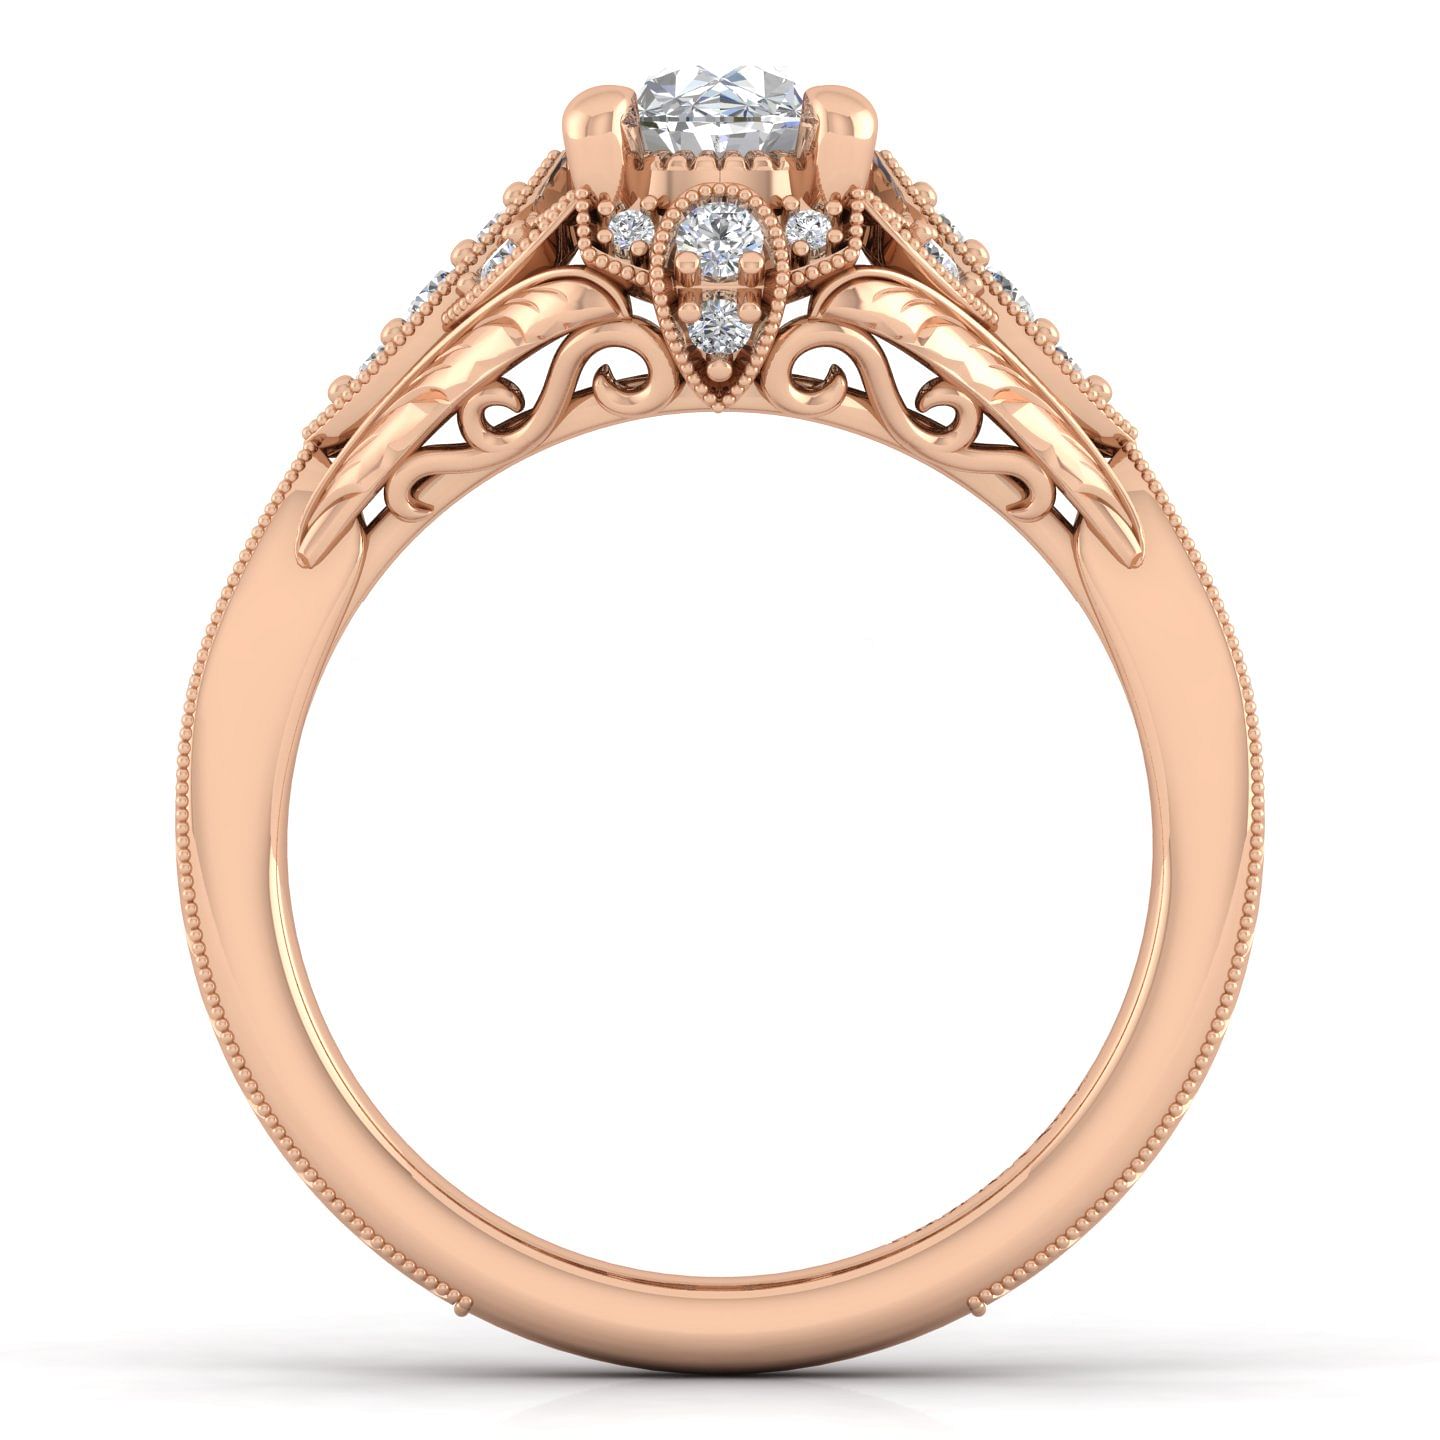 Unique 14K Rose Gold Vintage Inspired Oval Halo Diamond Engagement Ring